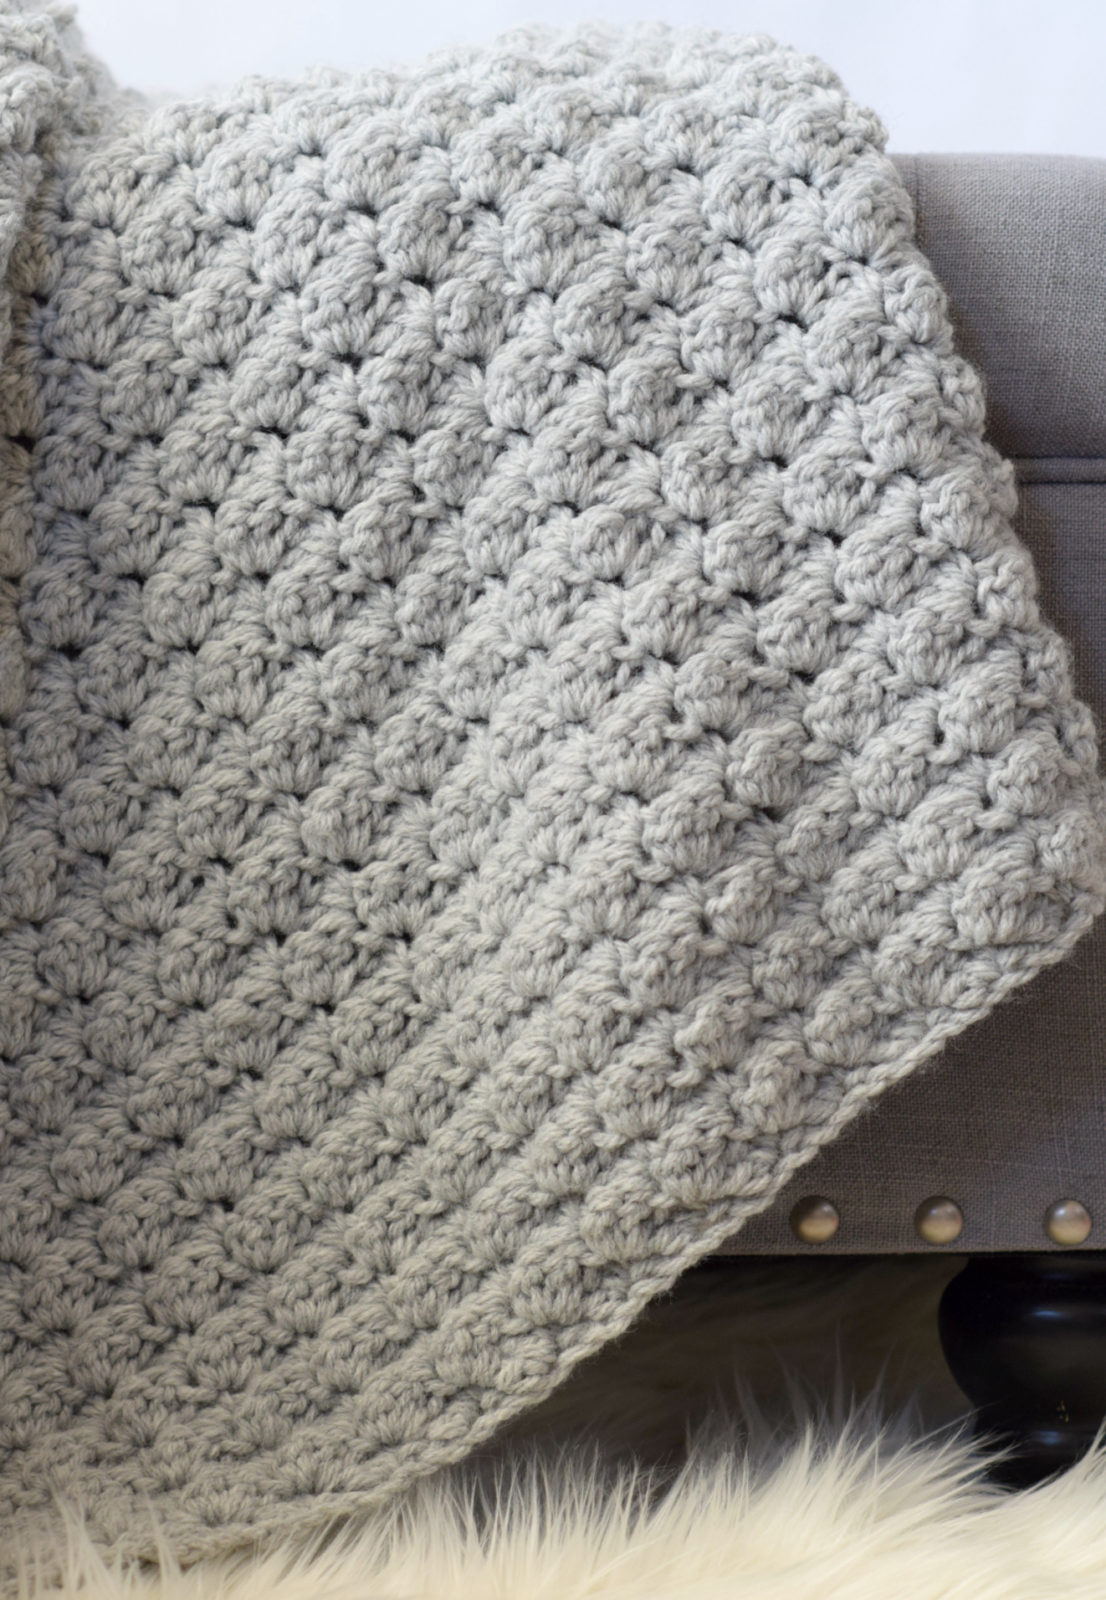 Simple Crochet Afghan Patterns Simple Crocheted Blanket Go To Pattern Mama In A Stitch